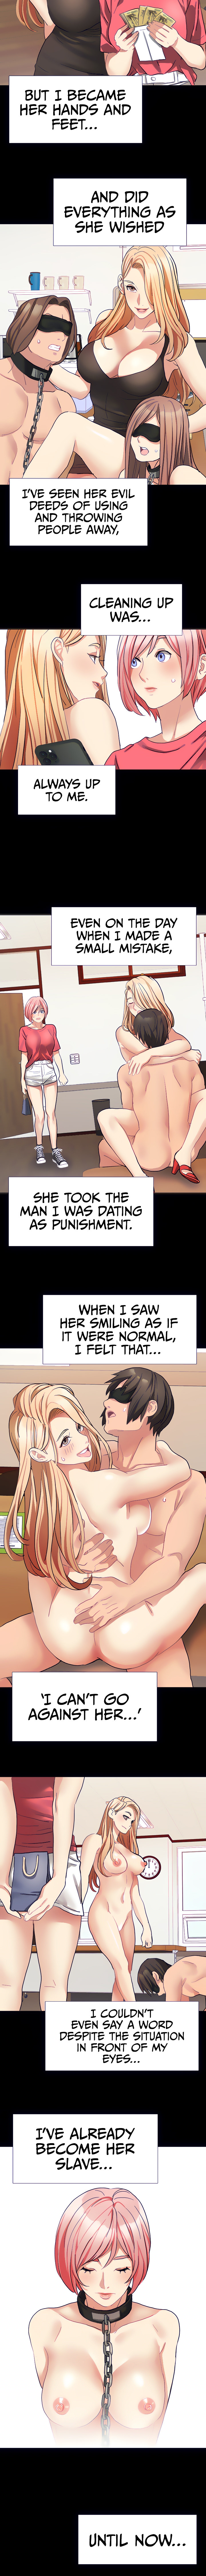 Punishments for Bad Girls - Chapter 22 Page 9